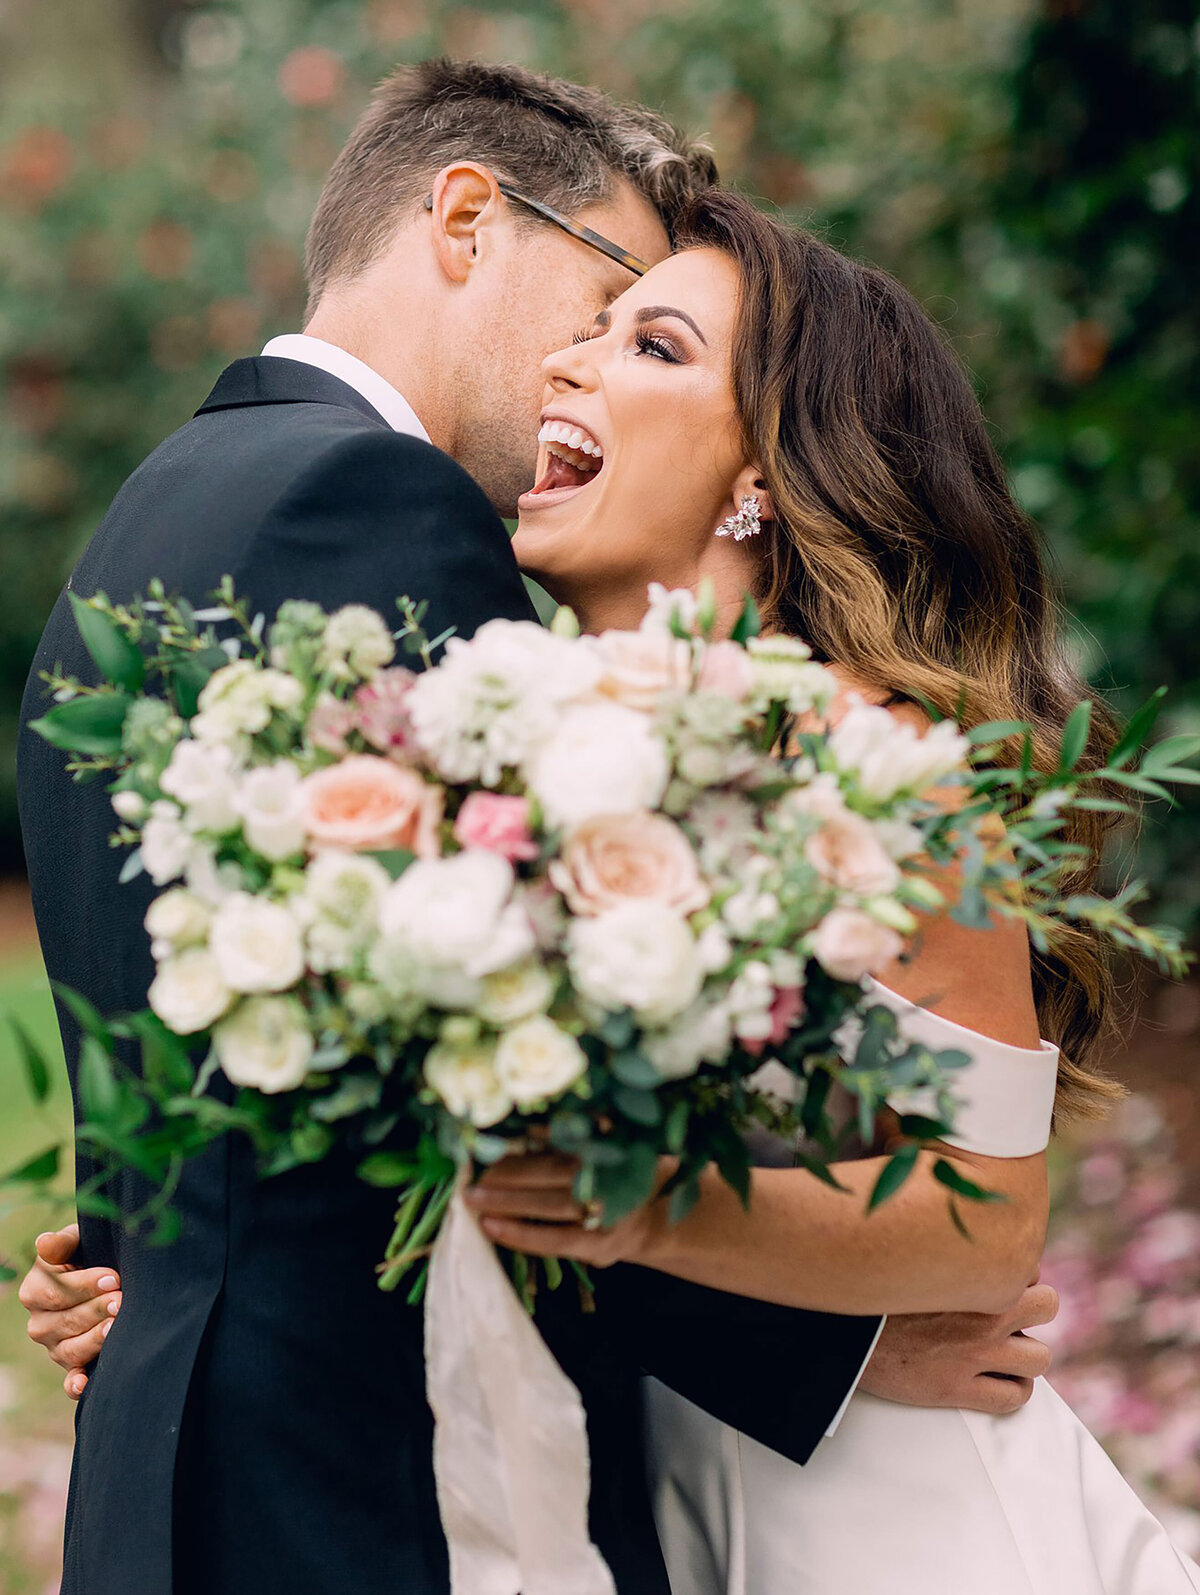 Groom embraces his stunning bride while she holds wedding bouquet